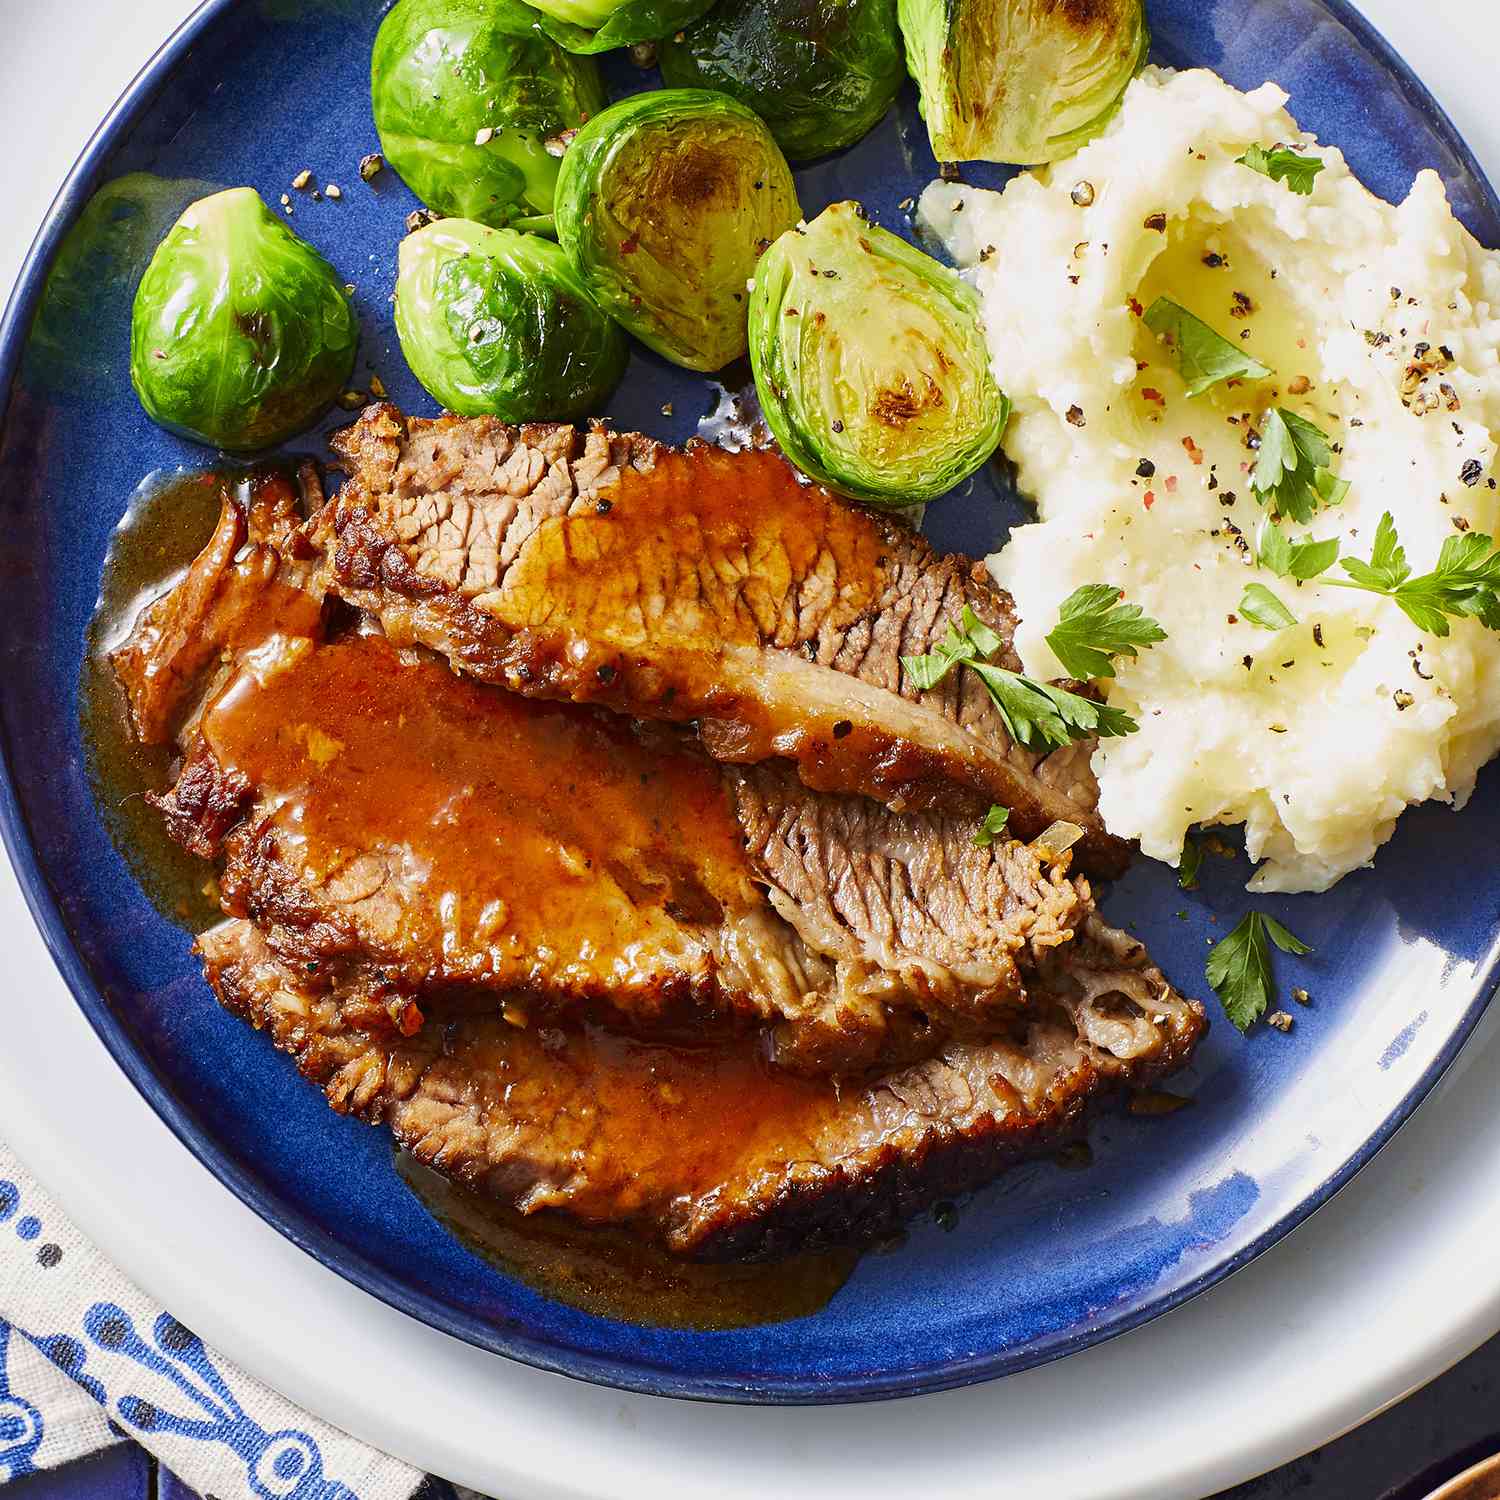 Close up view of sliced Jewish Style Sweet and Sour Brisket served with mashed potatoes garnished with fresh herbs and Brussels sprouts on a blue plate